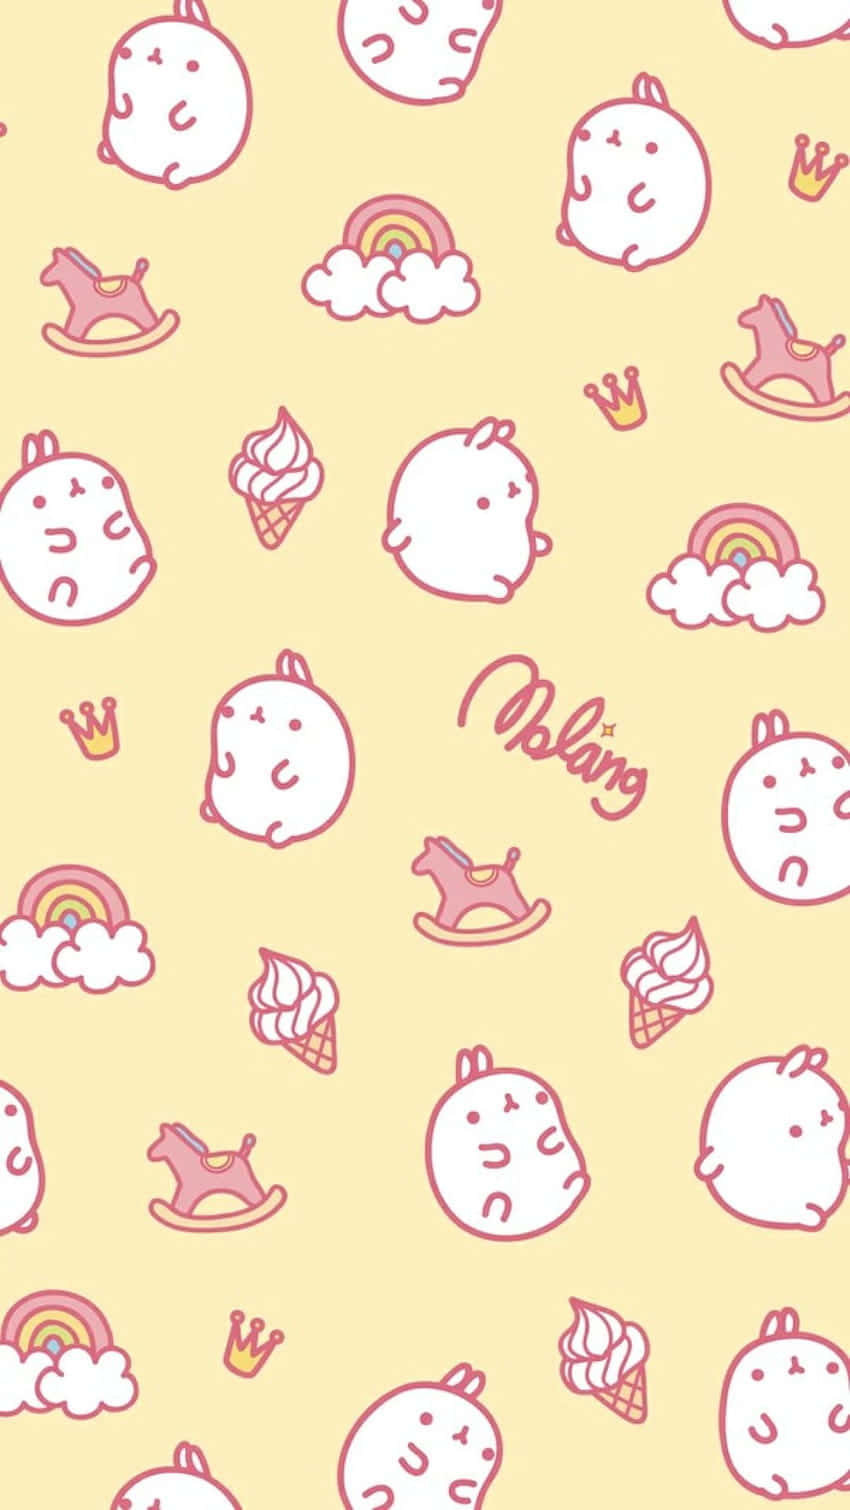 Make your day brighter with this cheerful kawaii yellow Wallpaper